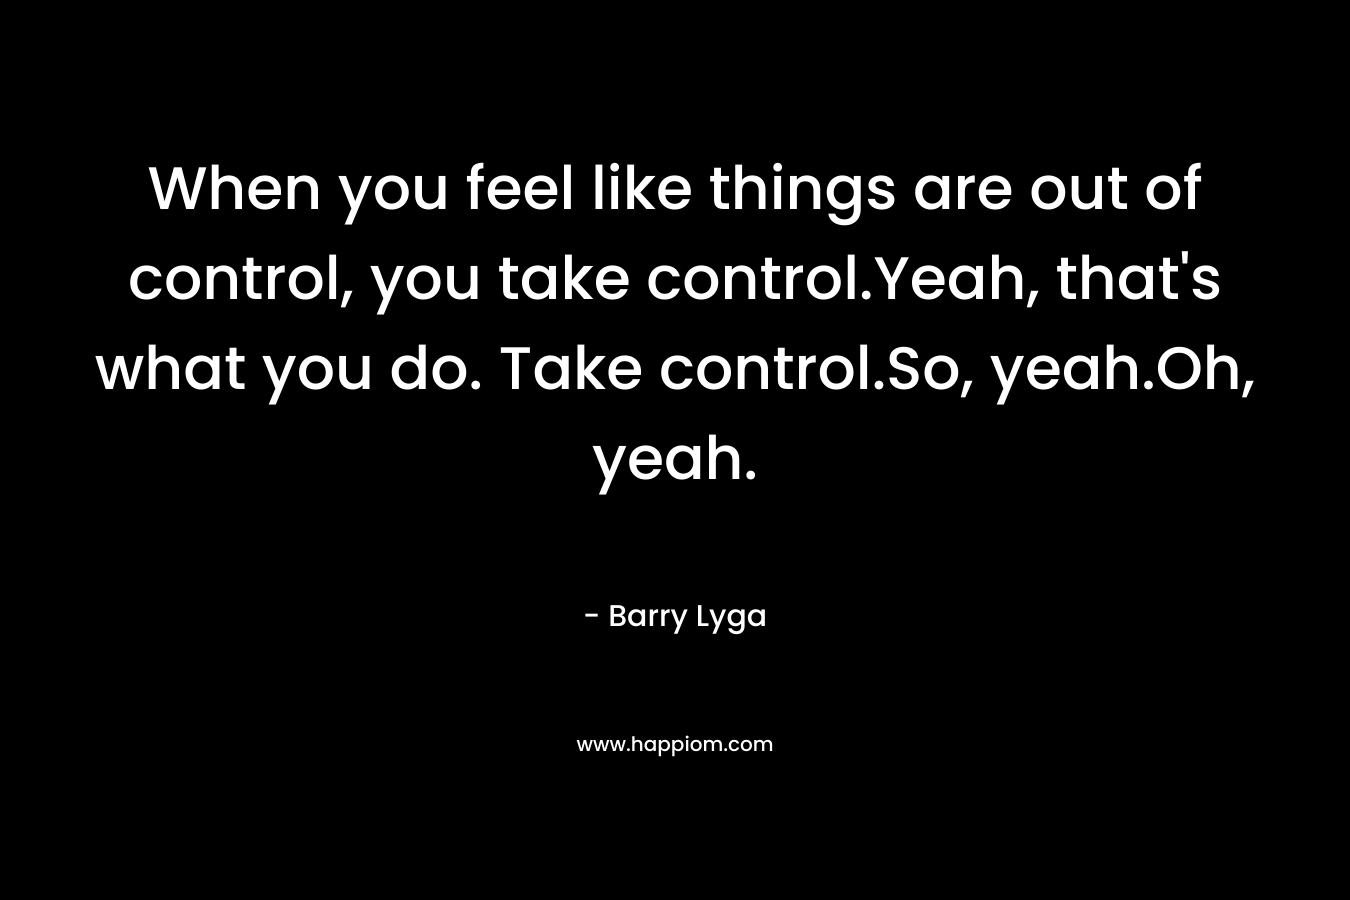 When you feel like things are out of control, you take control.Yeah, that’s what you do. Take control.So, yeah.Oh, yeah. – Barry Lyga